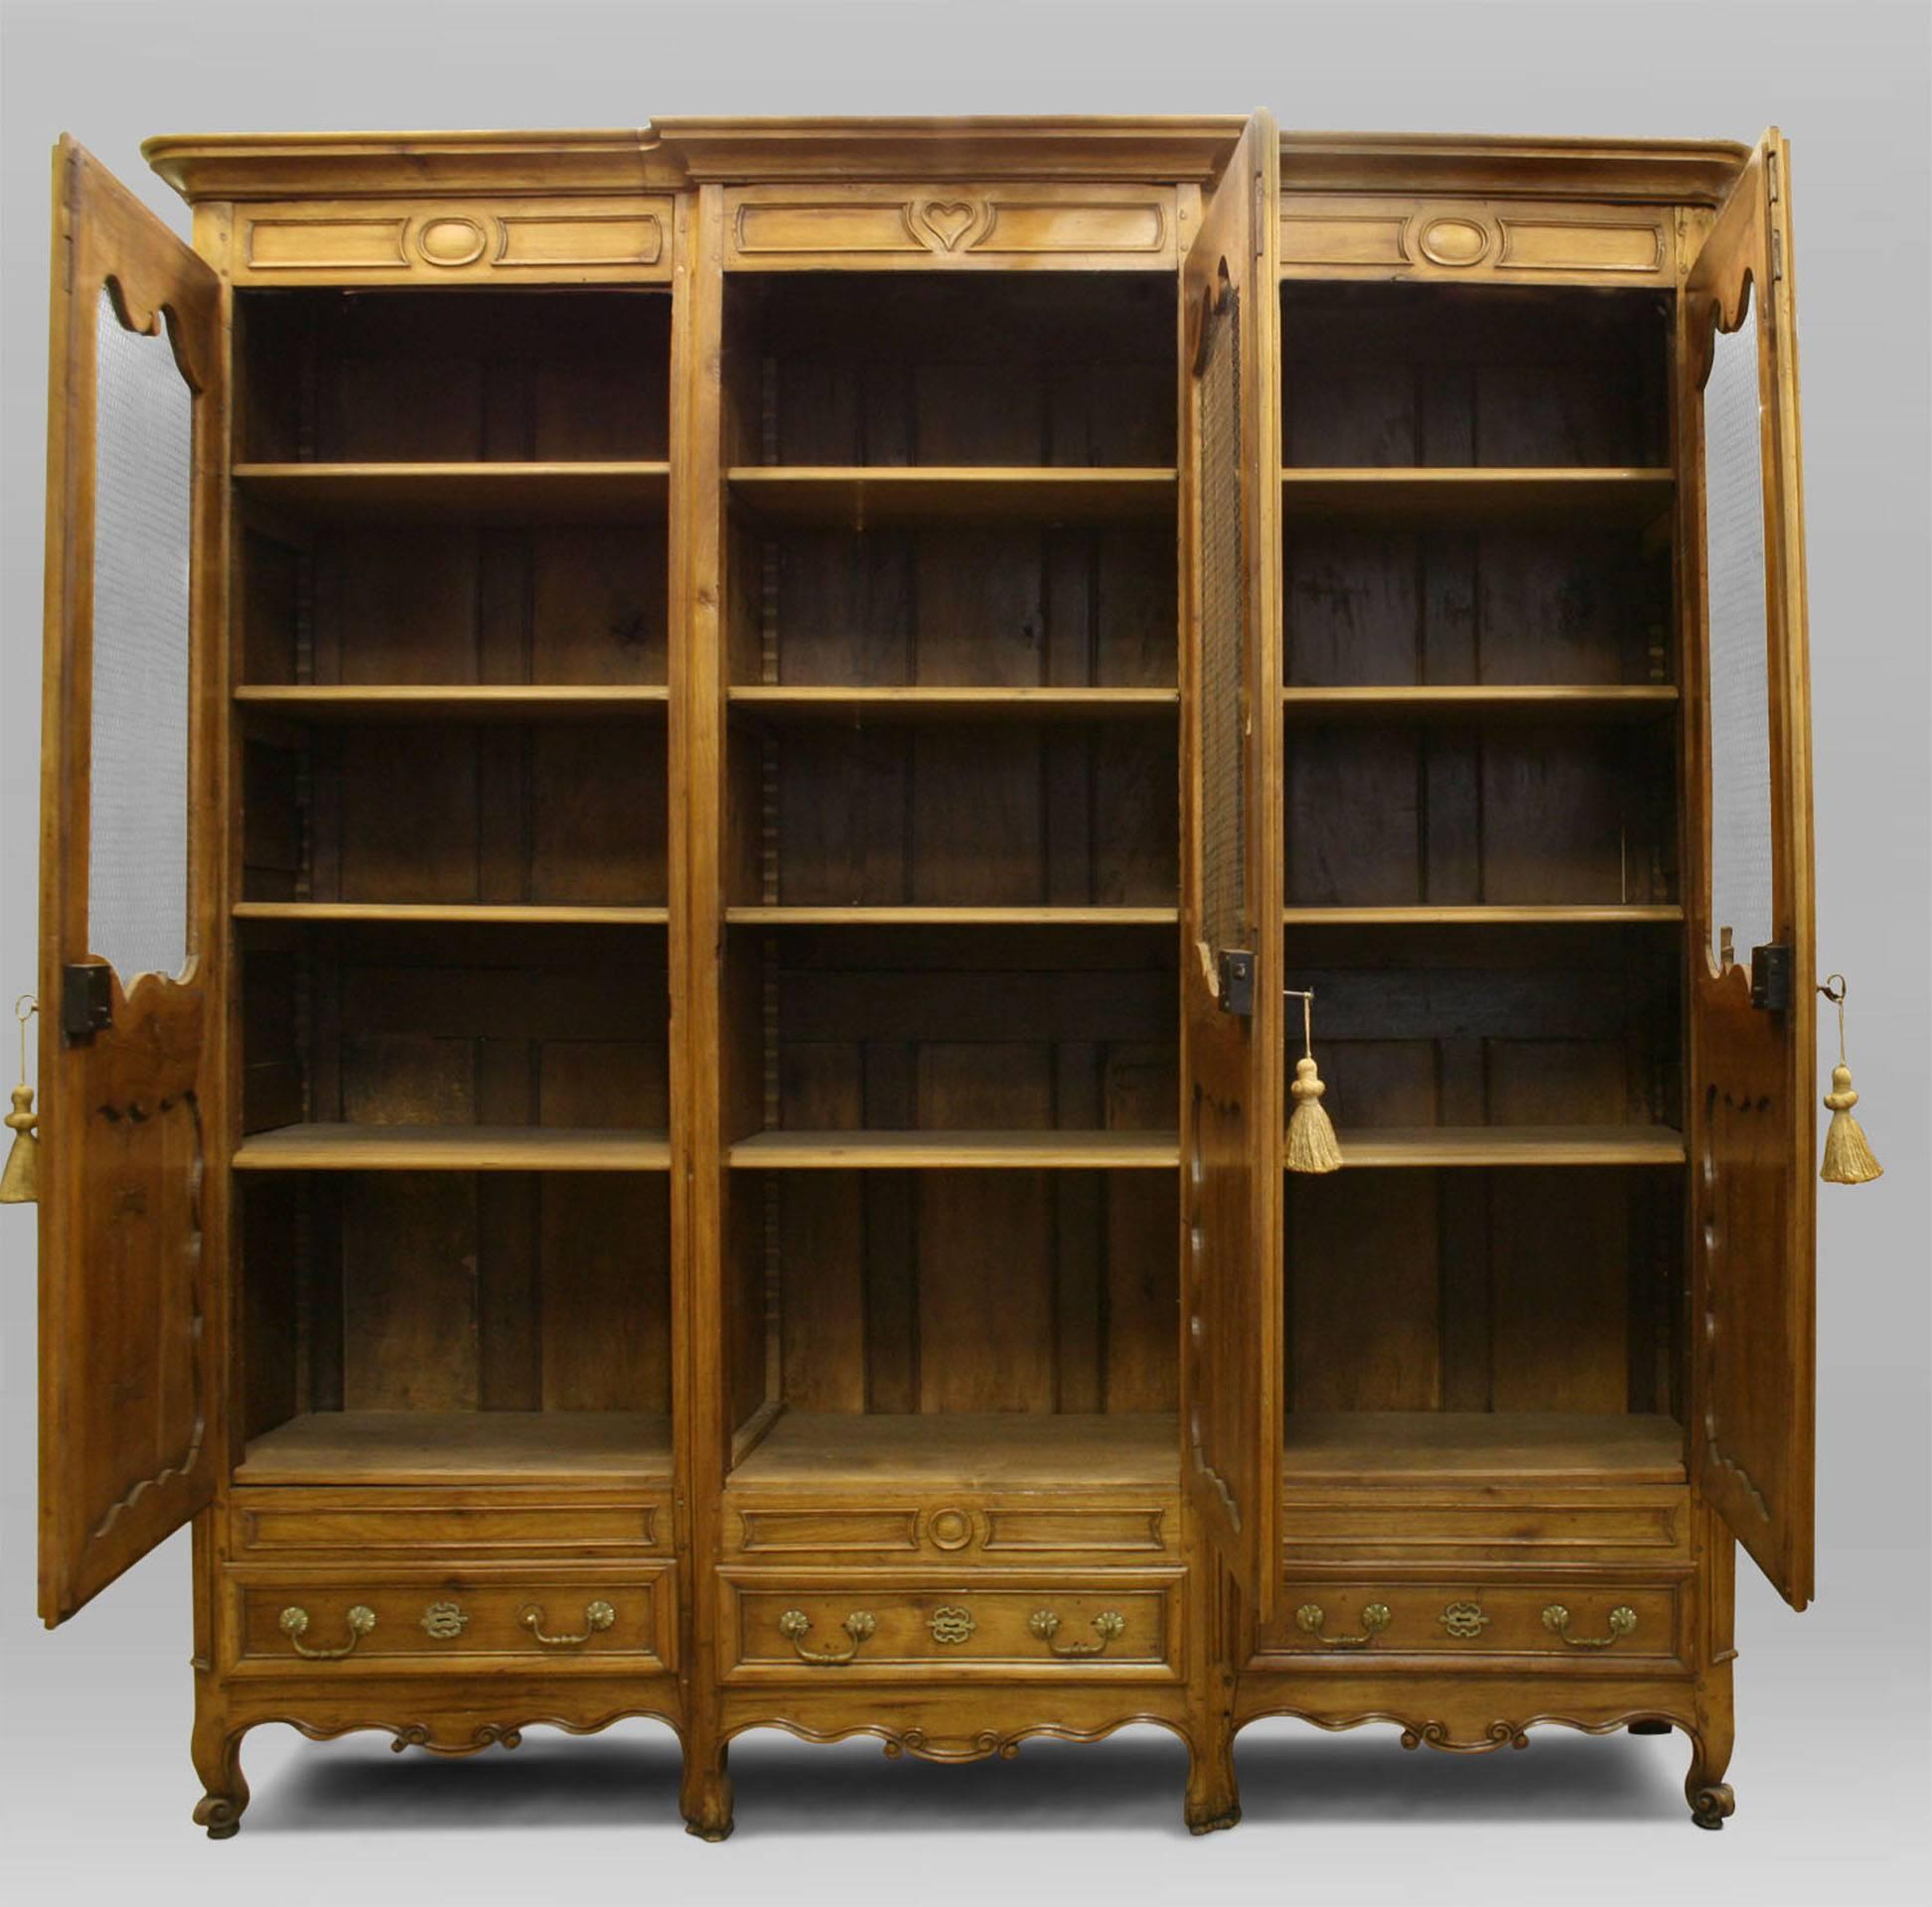 French Provincial (18/19th Century) walnut armoire cabinet with 3 drawers at bottom and doors with wire mesh panels.
